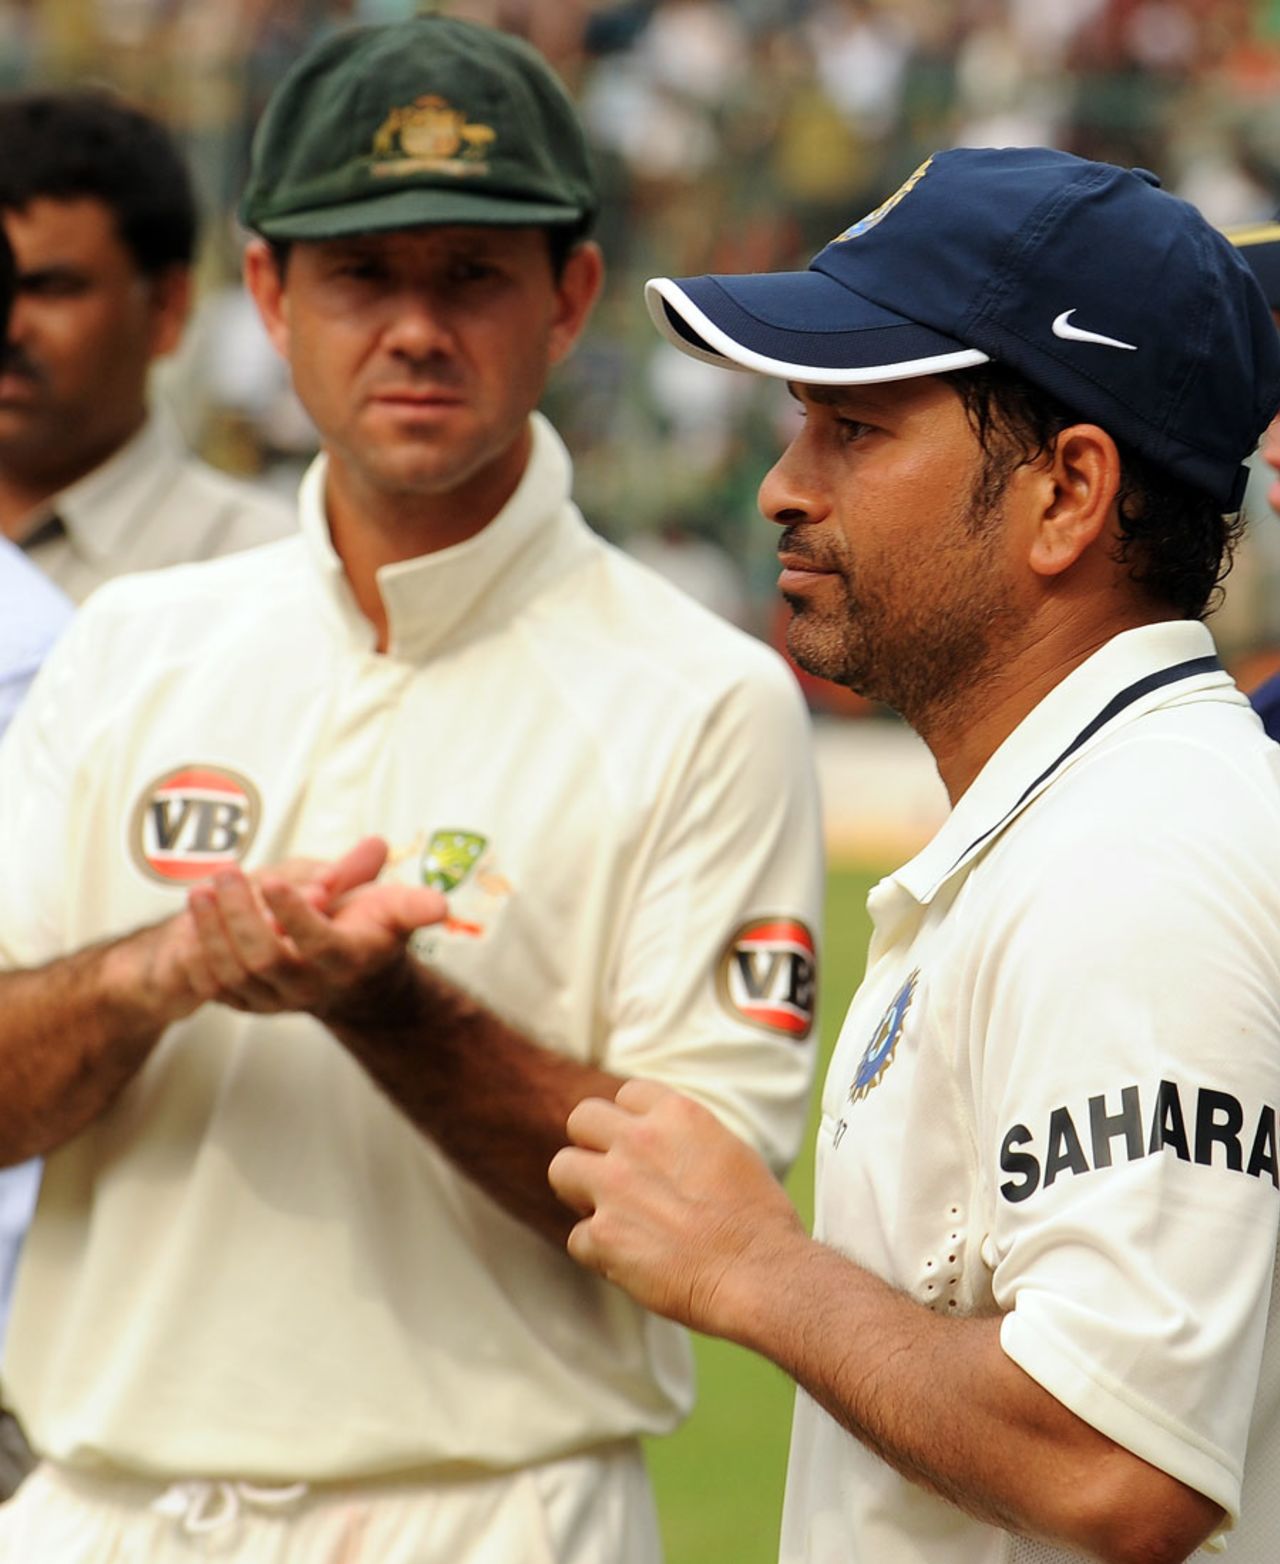 Ricky Ponting applauds as Sachin Tendulkar is adjudged Man of the Match, India v Australia, 2nd Test, Bangalore, 5th day, October 13, 2010